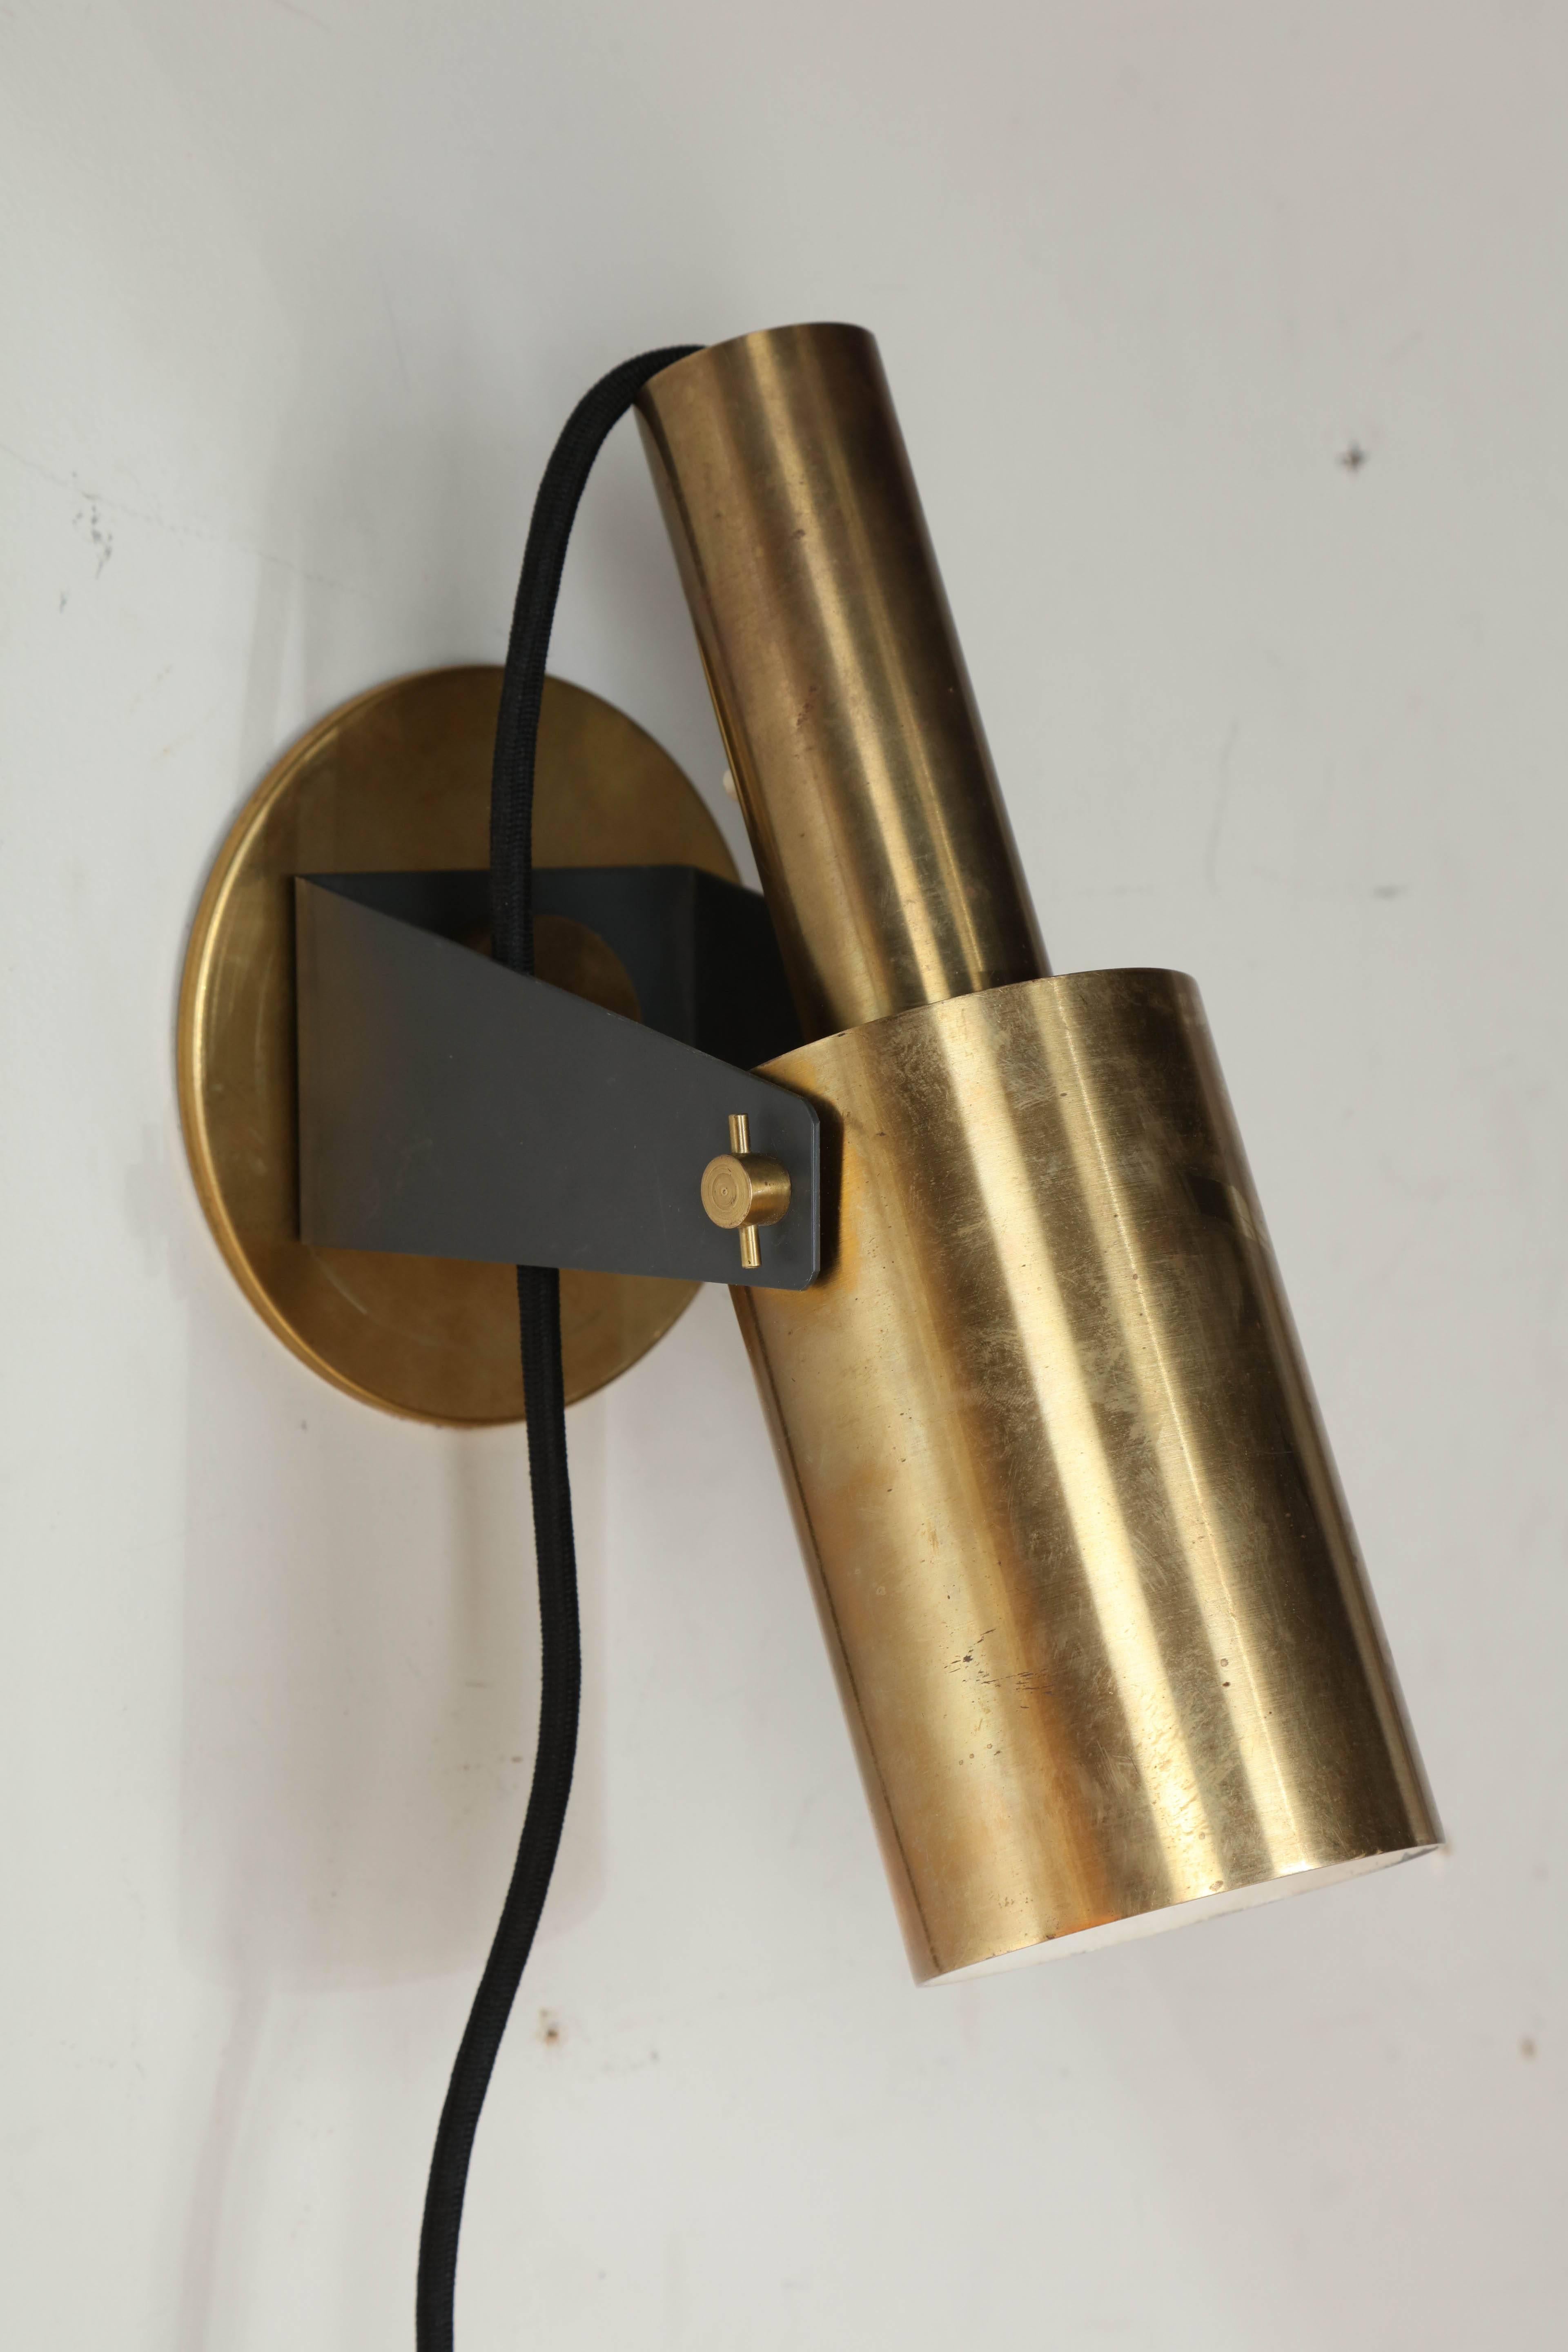 Pair of Slender Italian Mid Century Modern Brass Wall Sconces from the 1960's.  Featuring nicely machined, Industrial style, cylindrical and adjustable Brass shades with Off-White interior, Brass swivel bracket and round Brass wall support. Provides